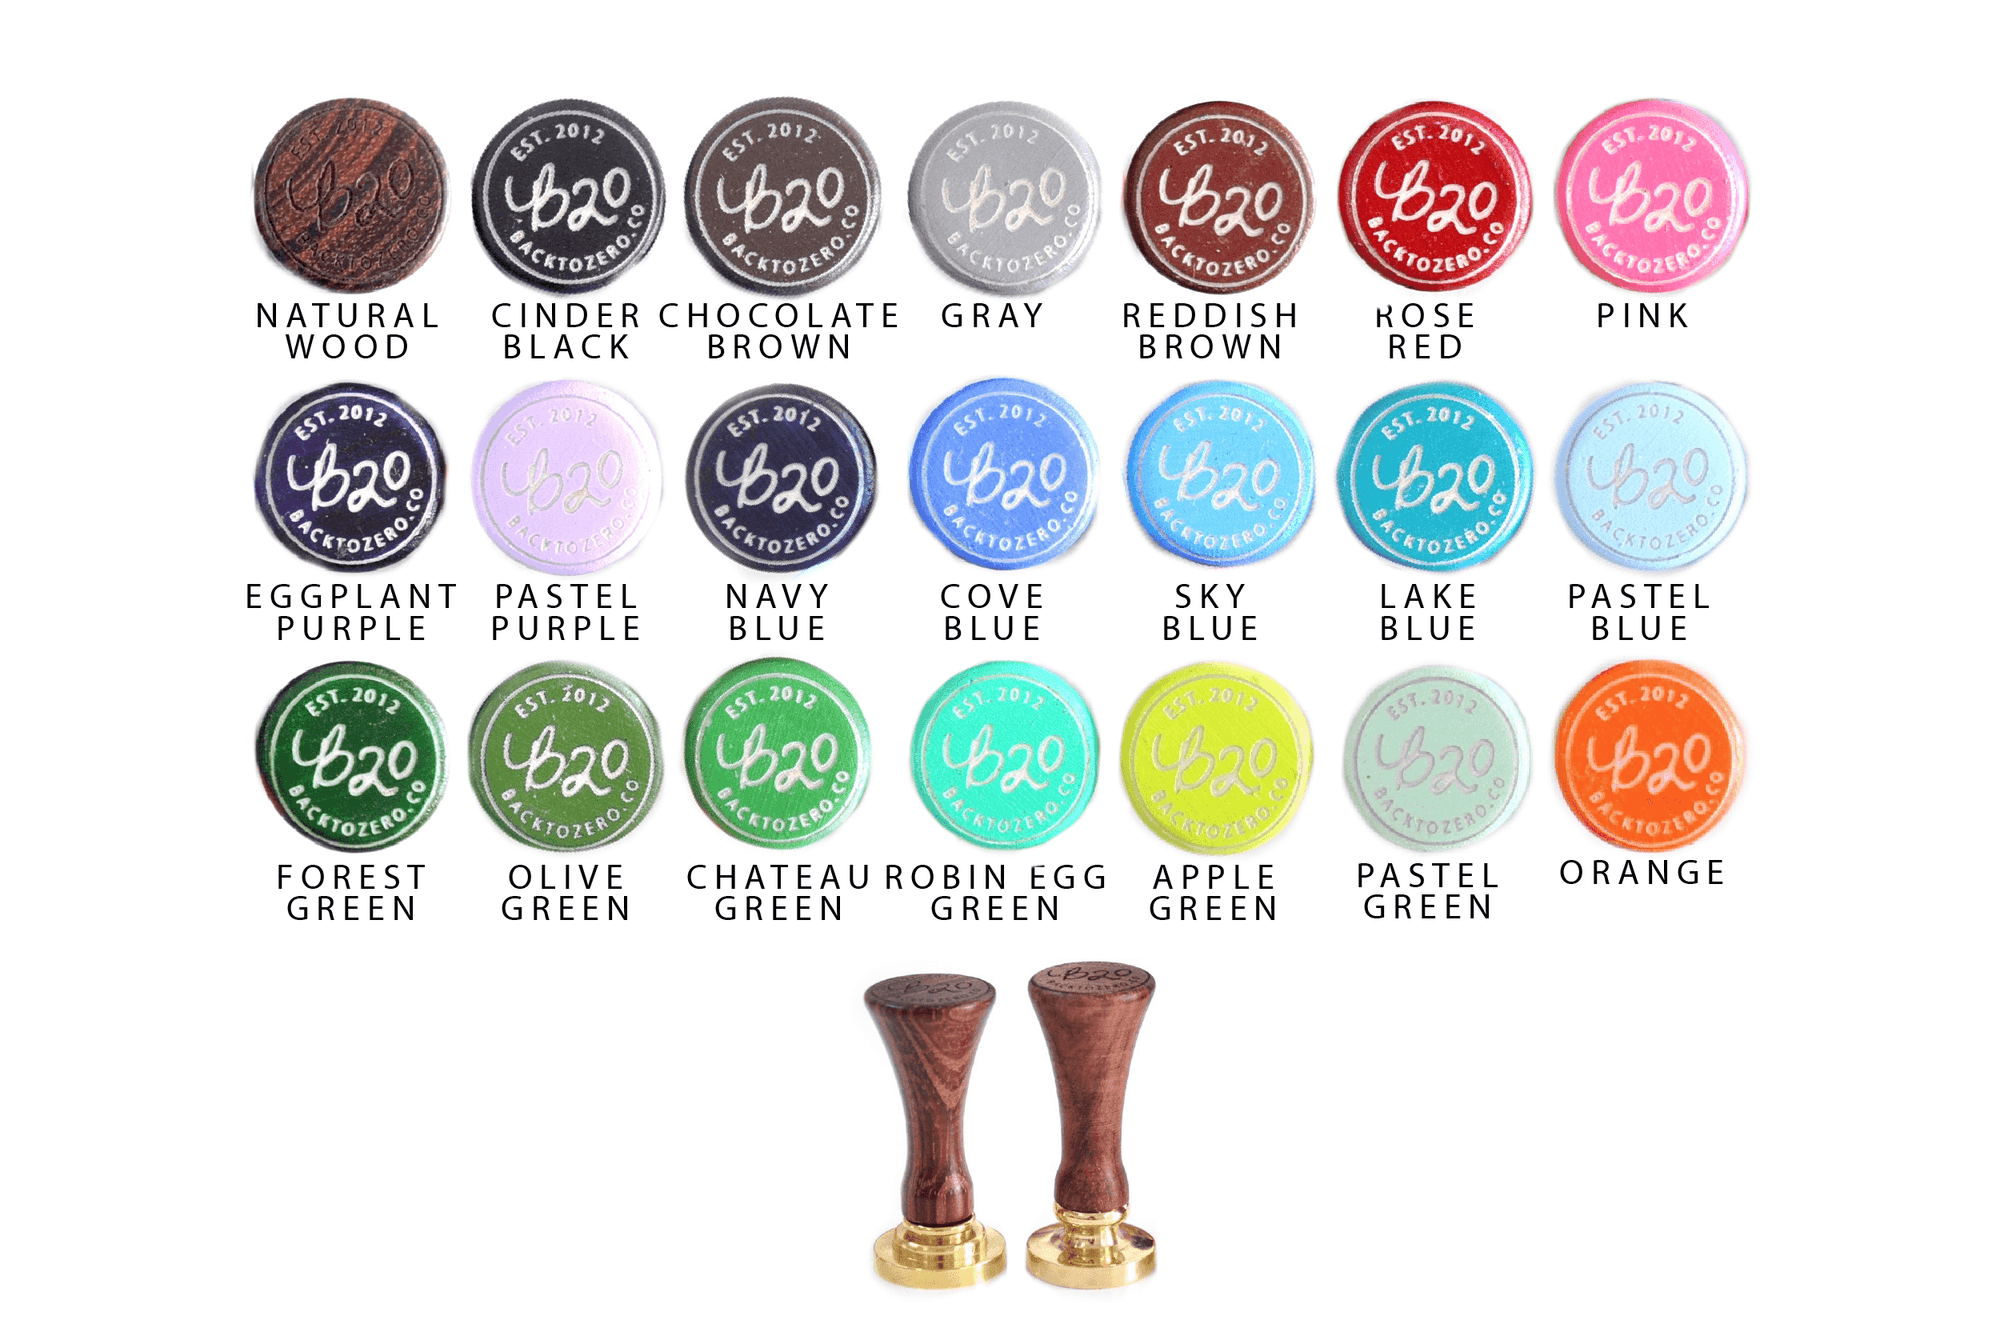 Suzanne Cunningham Calligraphy R Wax Seal Stamp | Available in 4 Sizes - Backtozero B20 - 1 initial, 1.2cm, 1initial, Calligraphy, collaboration, mini, Monogram, One initial, Personalized, Purple, Signature, signaturehandle, Suzanne Cunningham, tiny